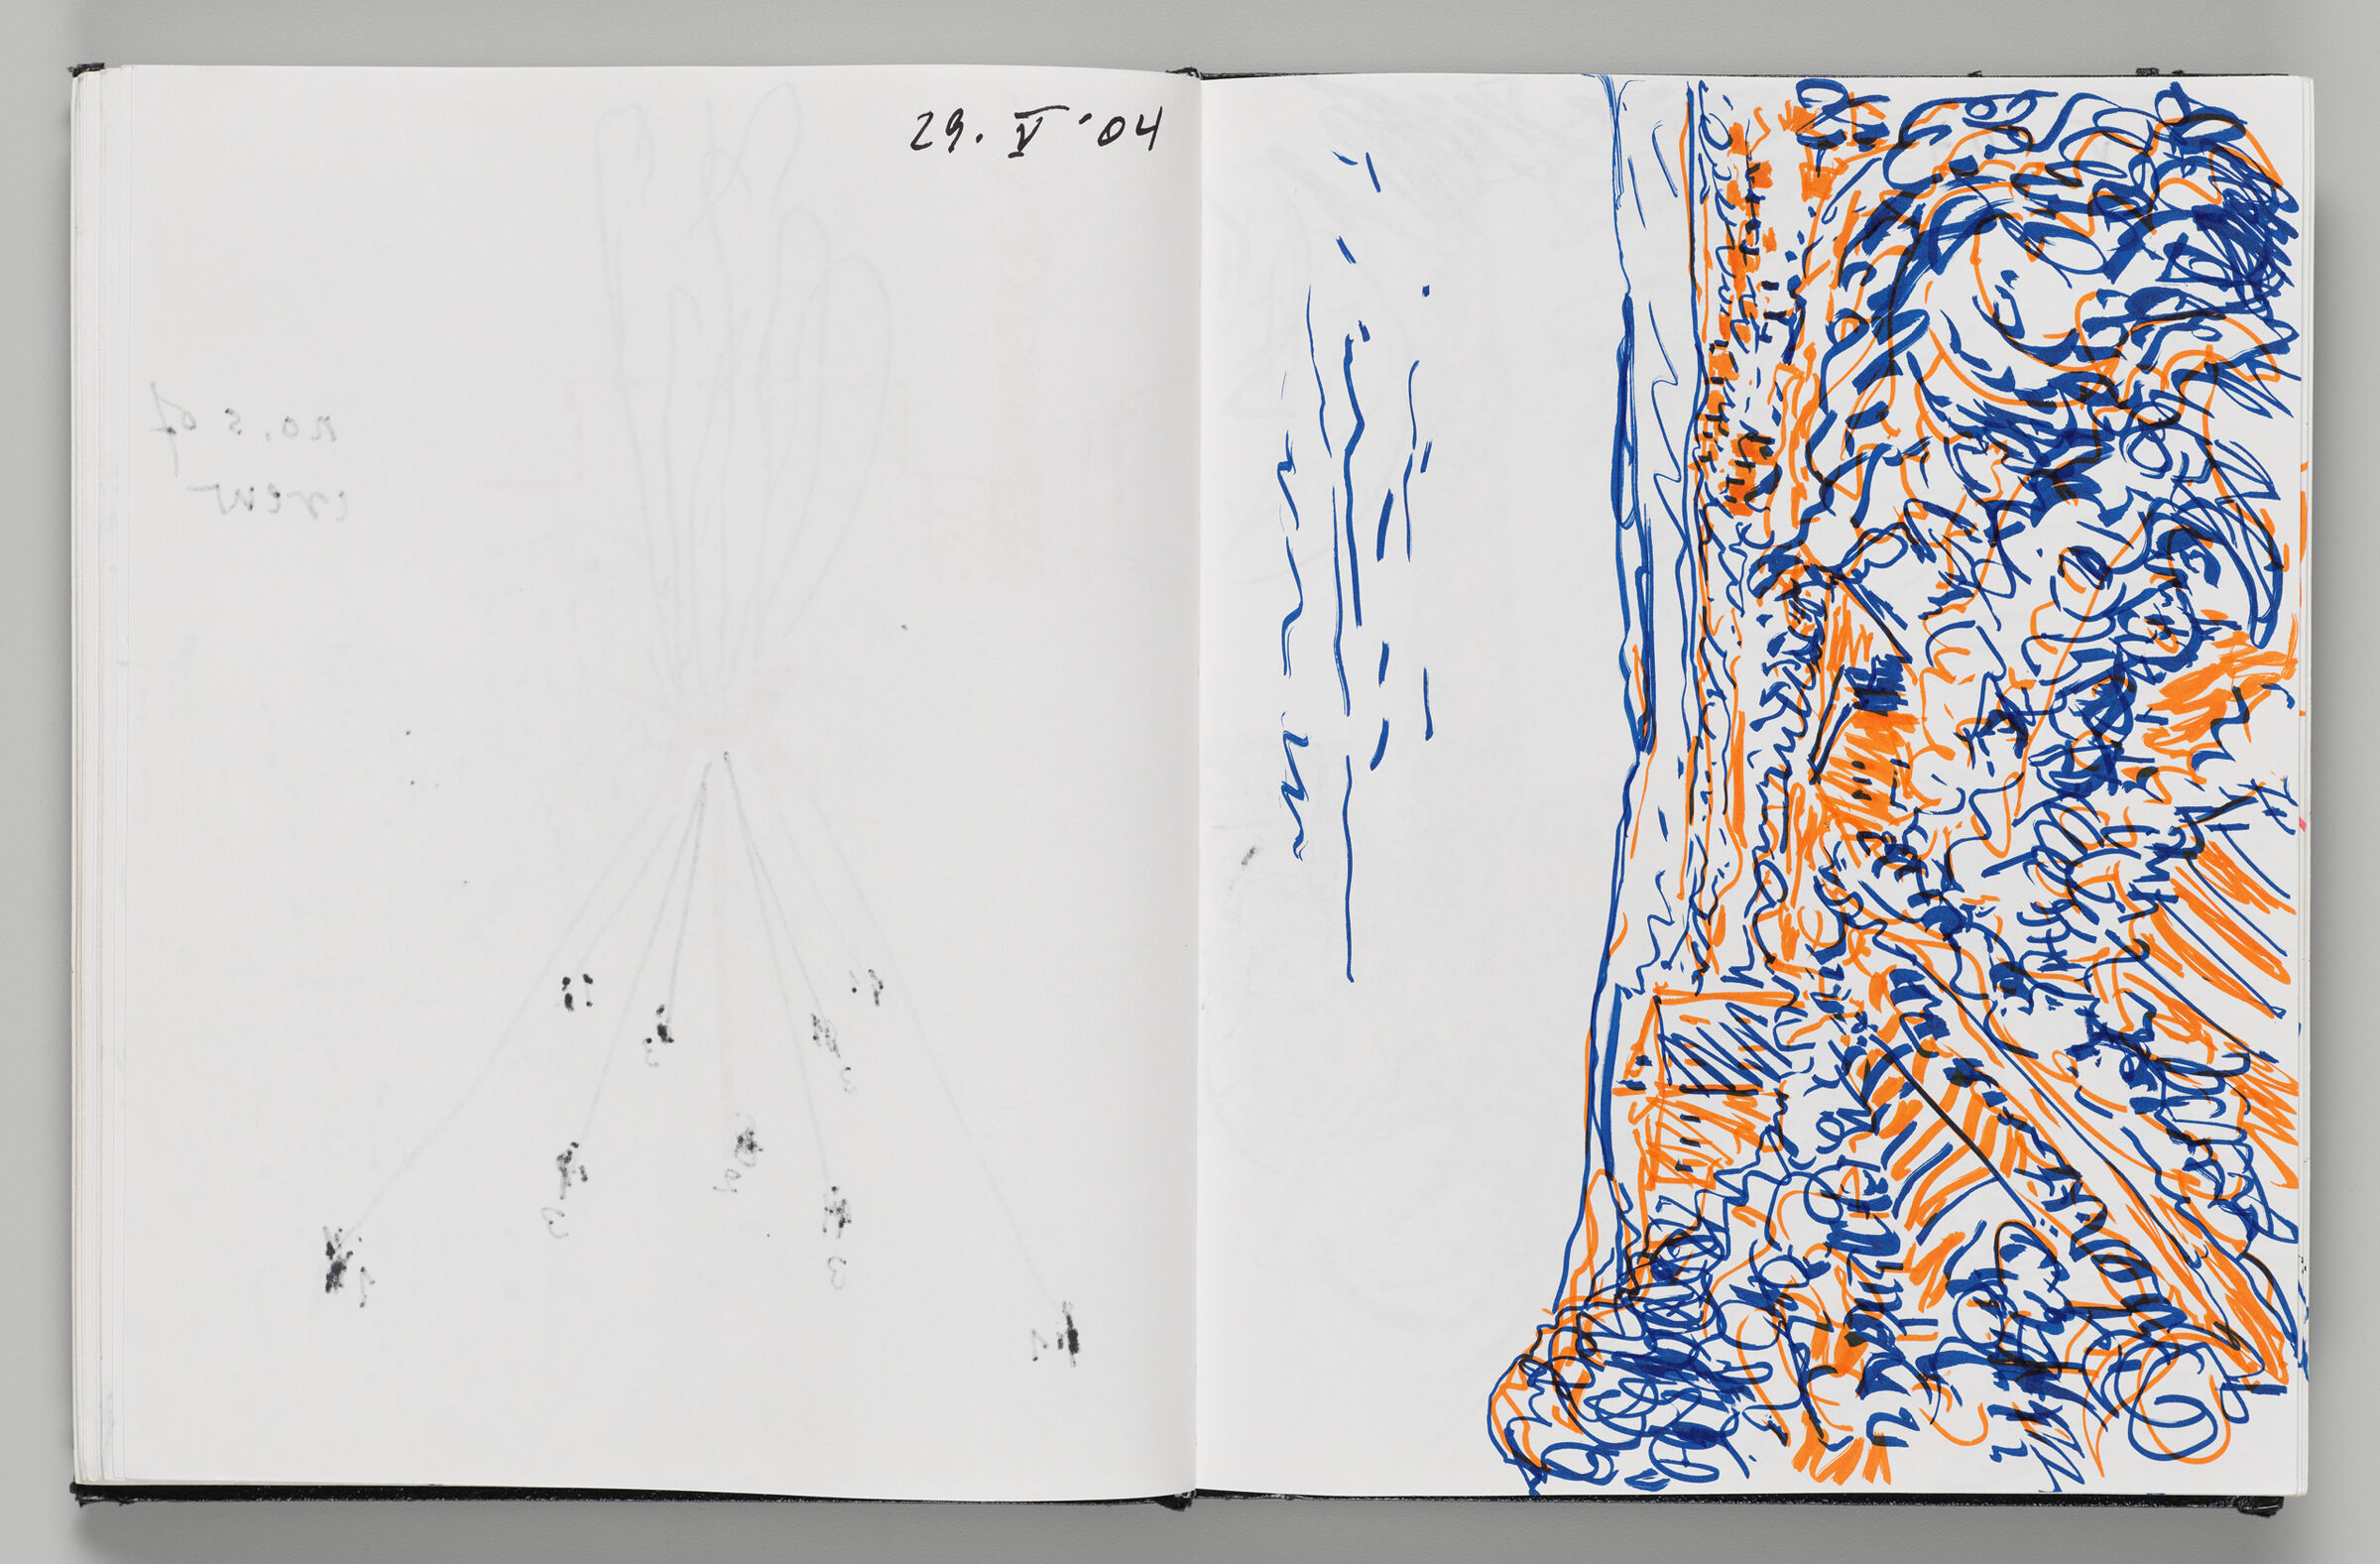 Untitled (Bleed-Through Of Previous Page And Note, Left Page); Untitled (Sketch Of Siena, Right Page)